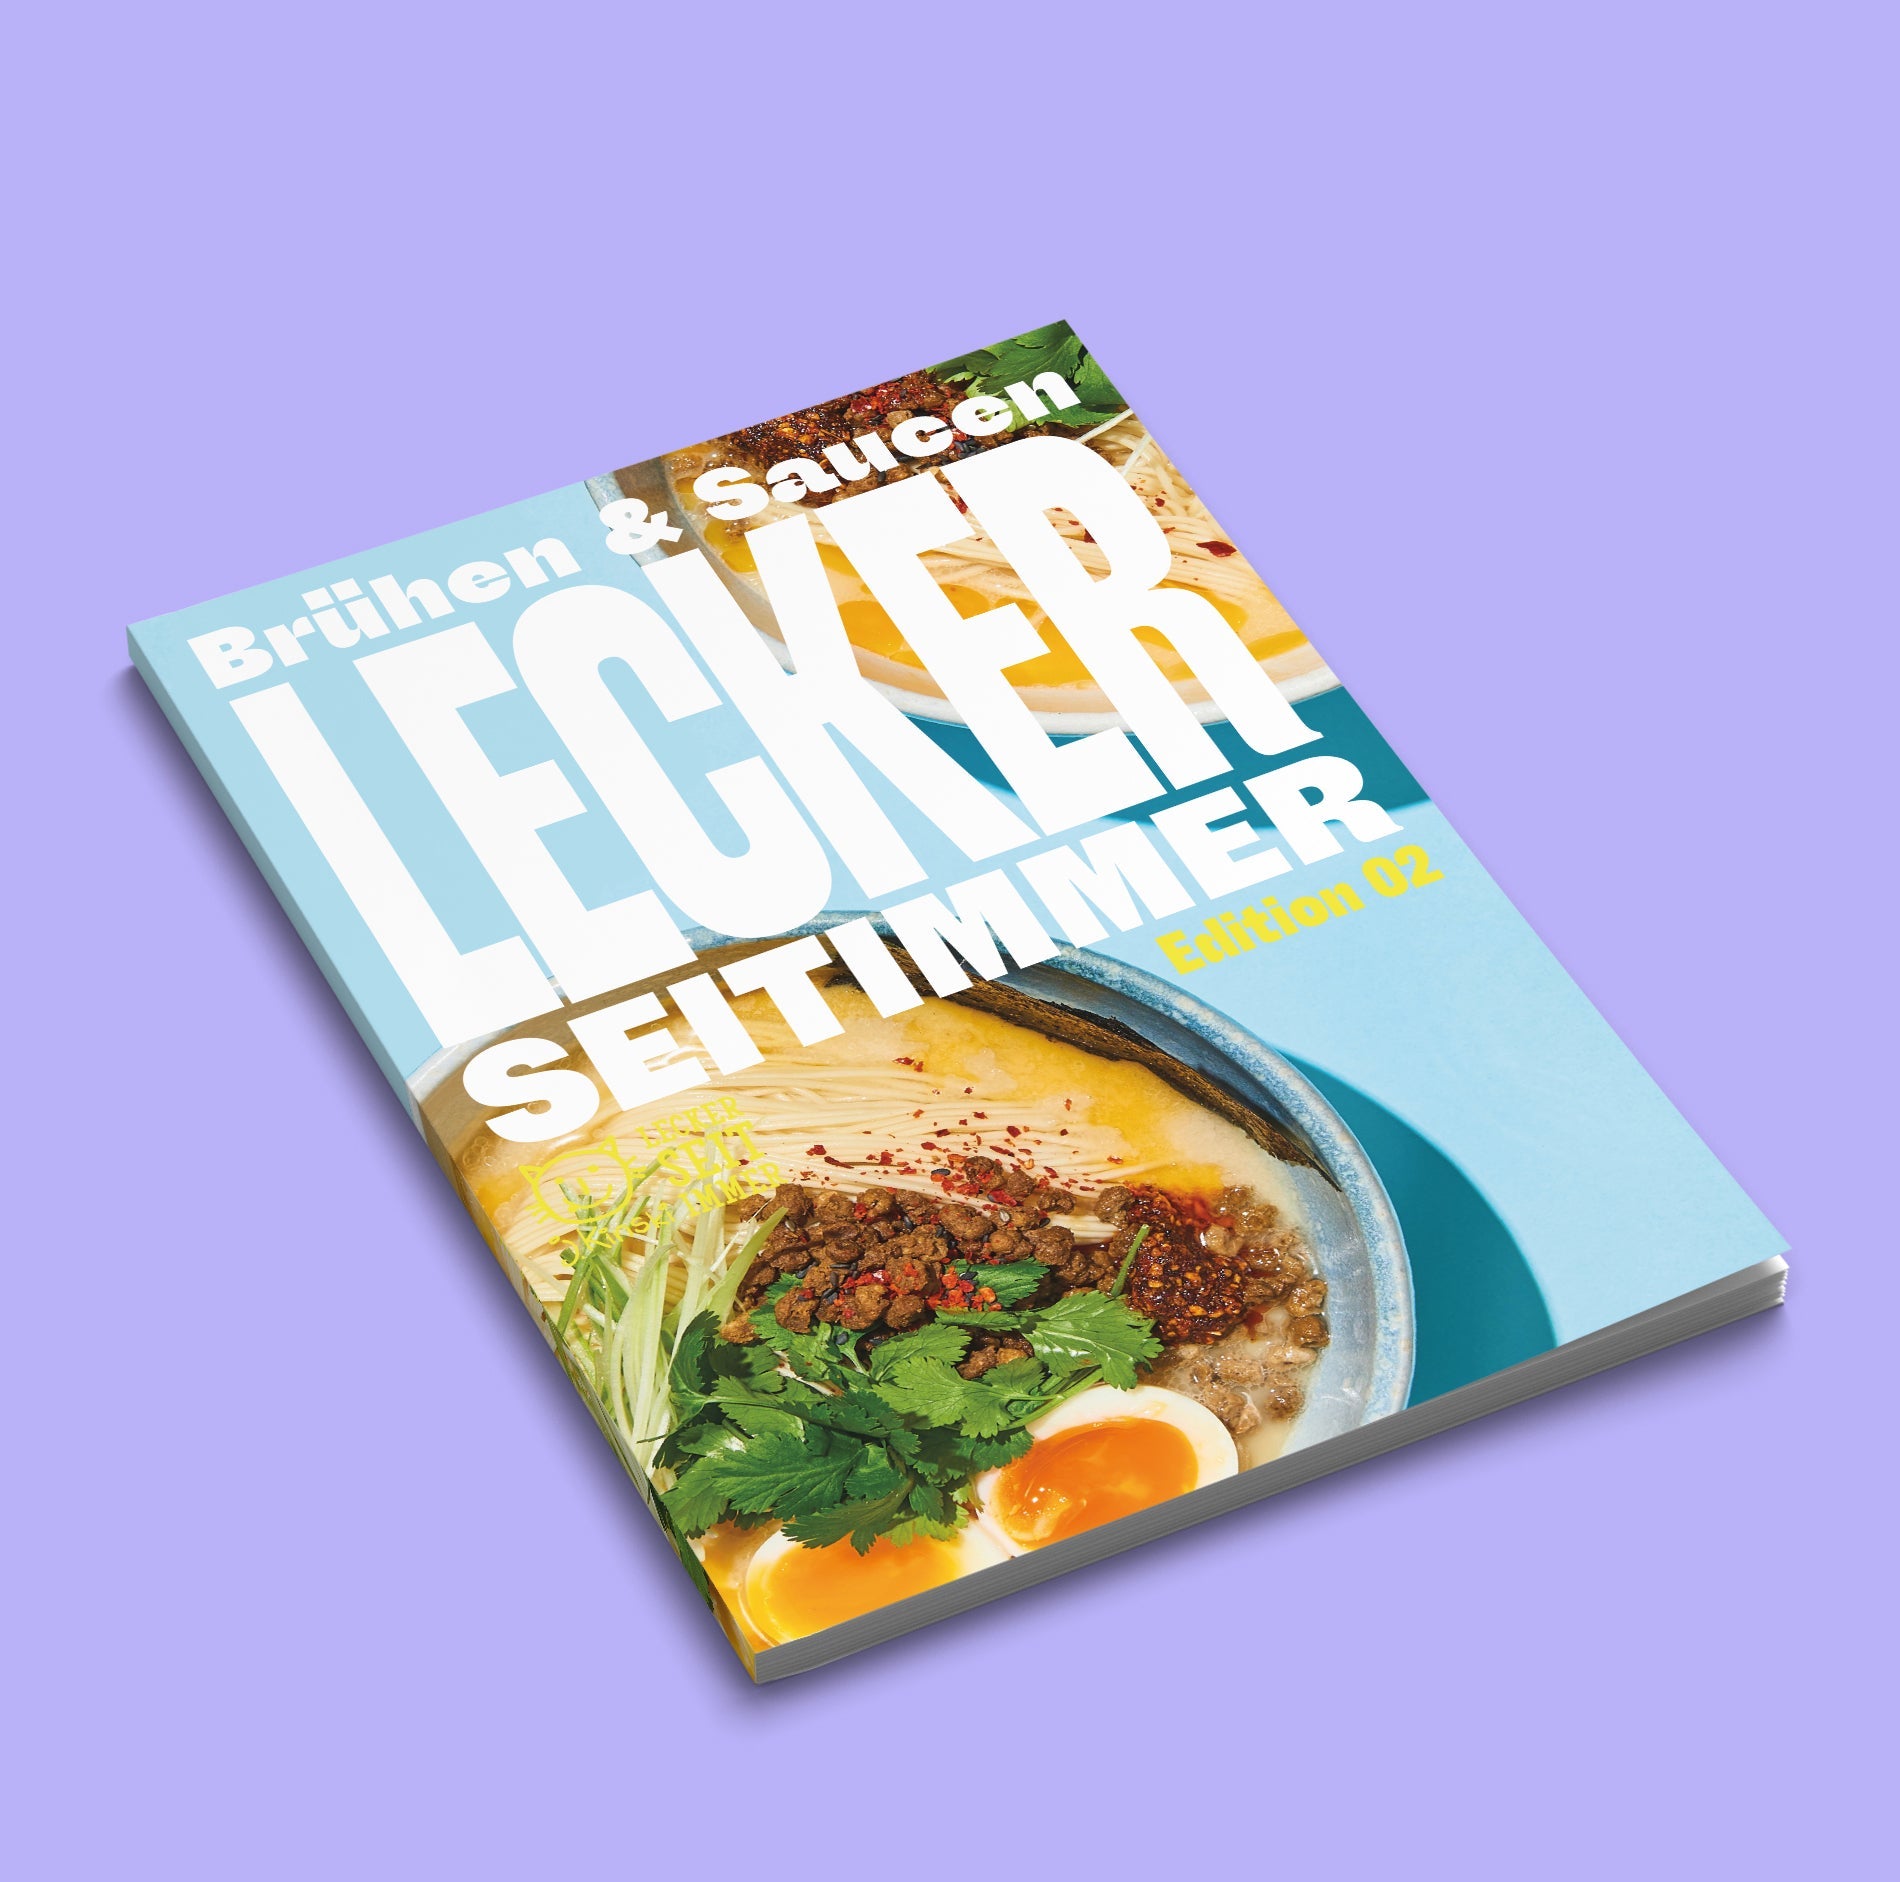 Recipe booklet "Recipes for Winners" - FREE